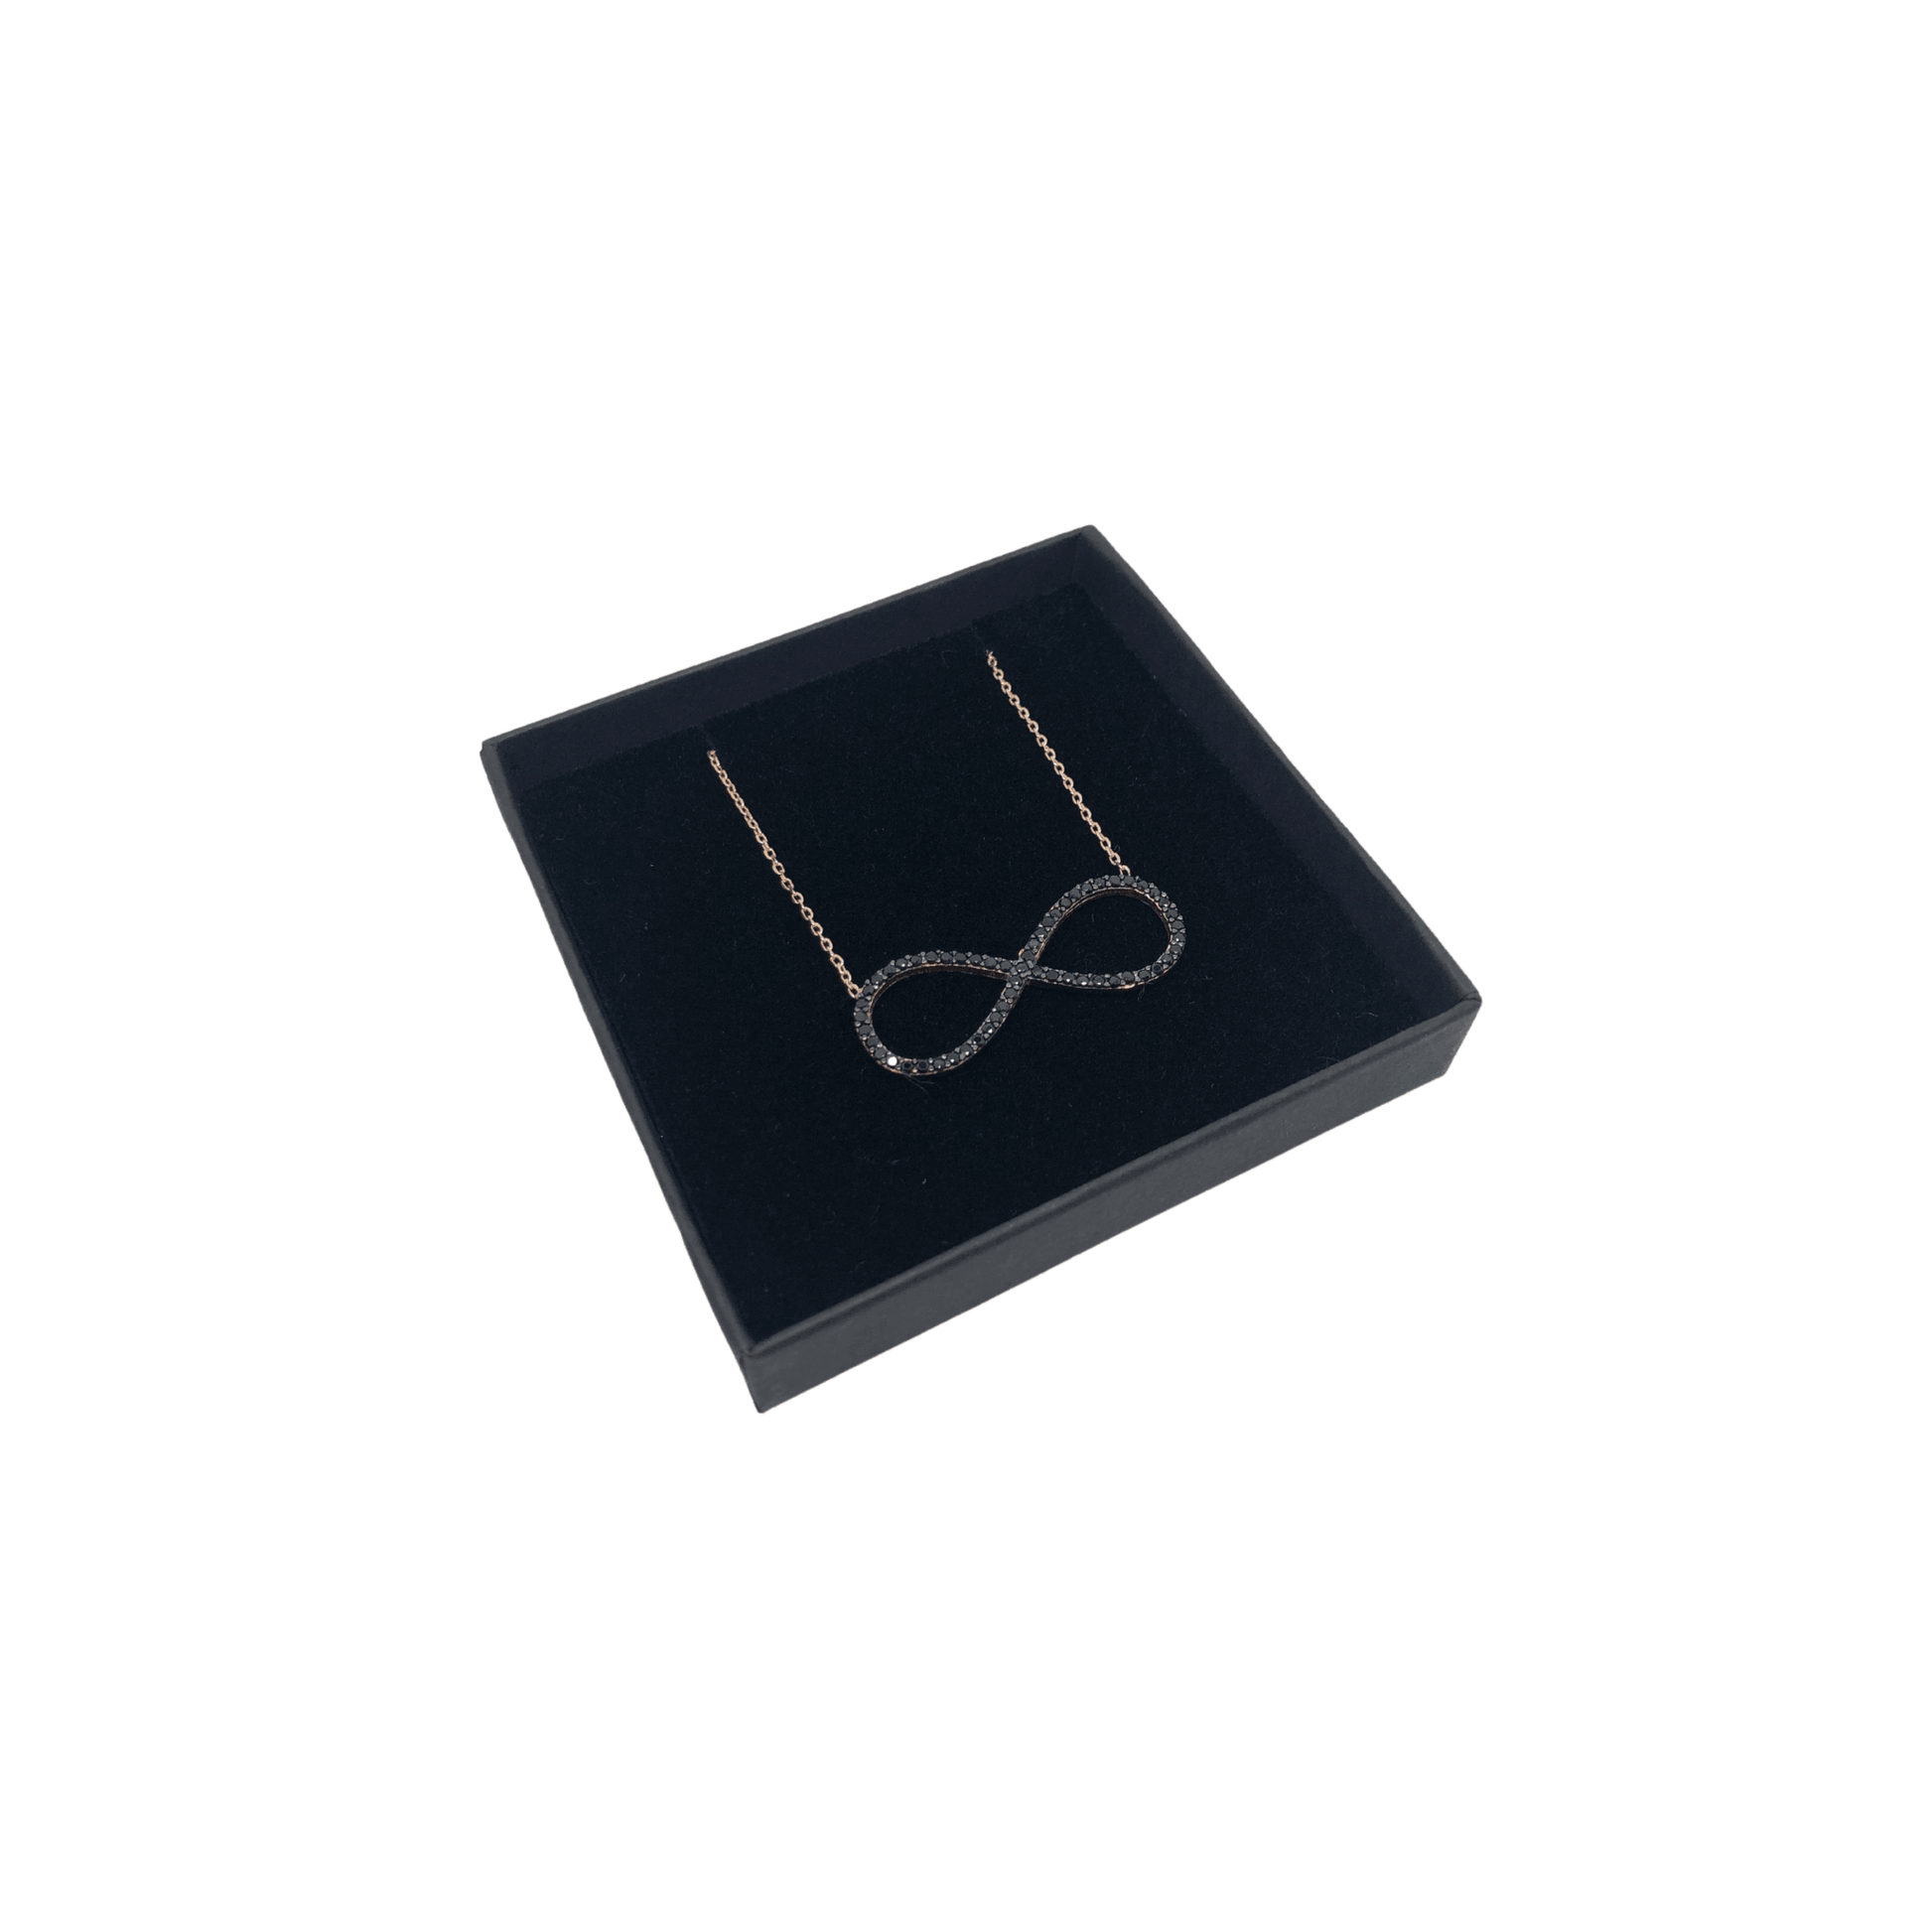 Italian Sterling Silver Infinity Necklace in Rose Gold and Black Stones - Naked Nation UK